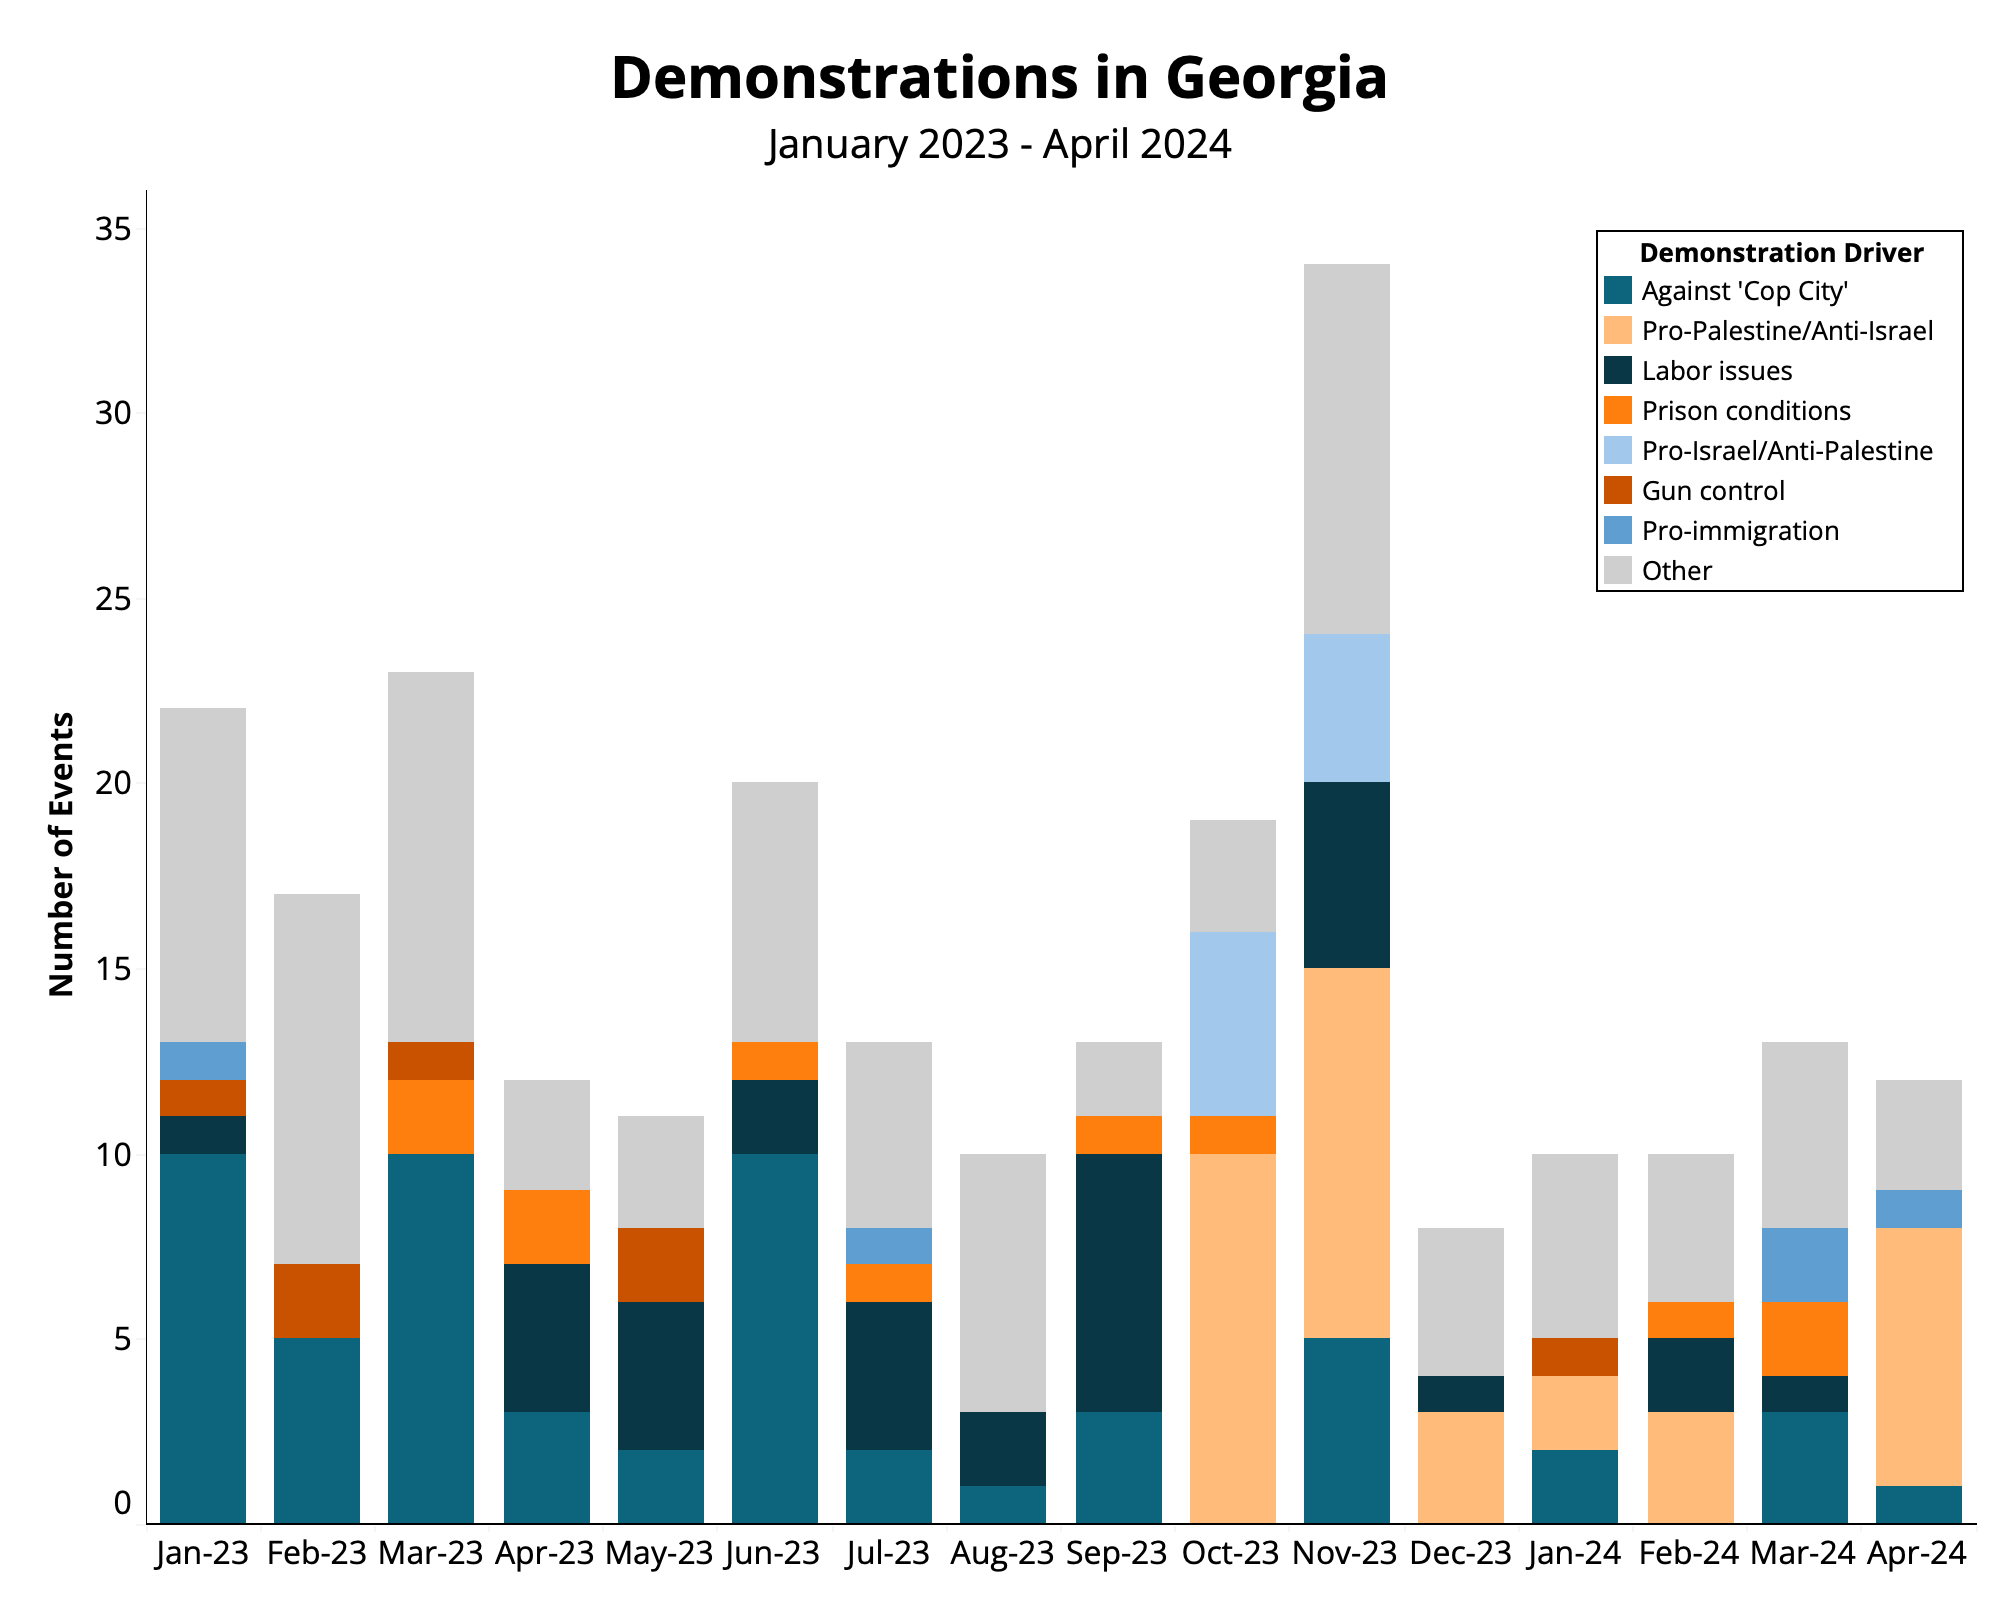 Bar chart - Election Watch - Demonstrations in Georgia January 2023 to April 2024